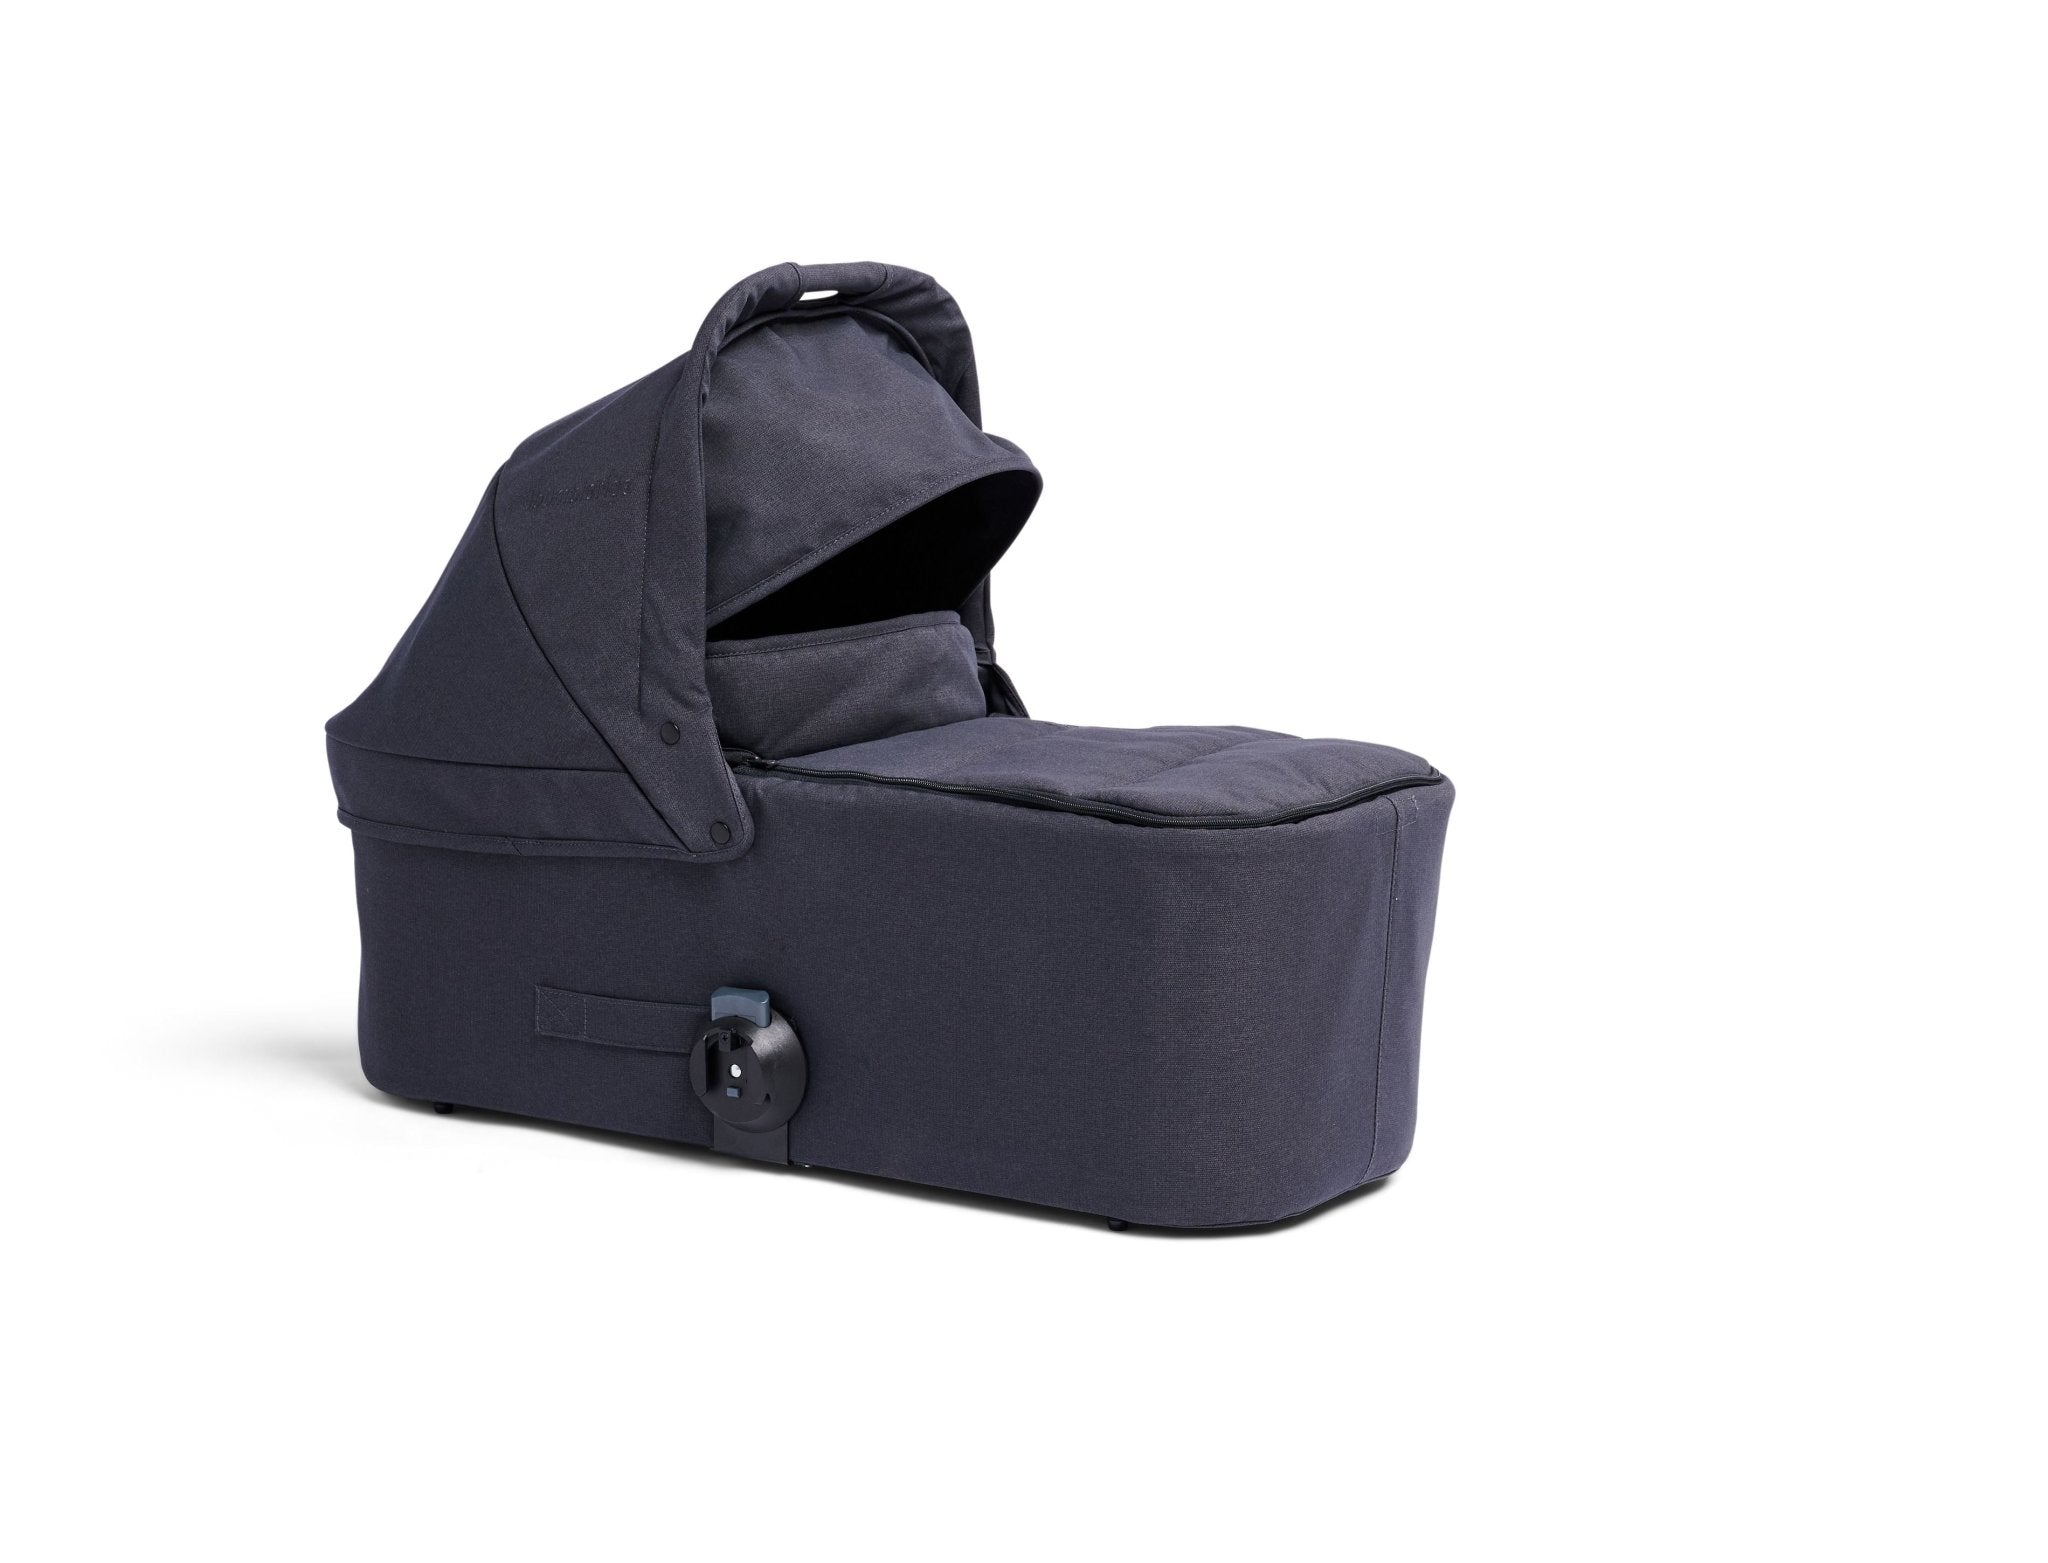 Bumbleride Indie Twin Bassinet - ANB Baby -$100 - $300